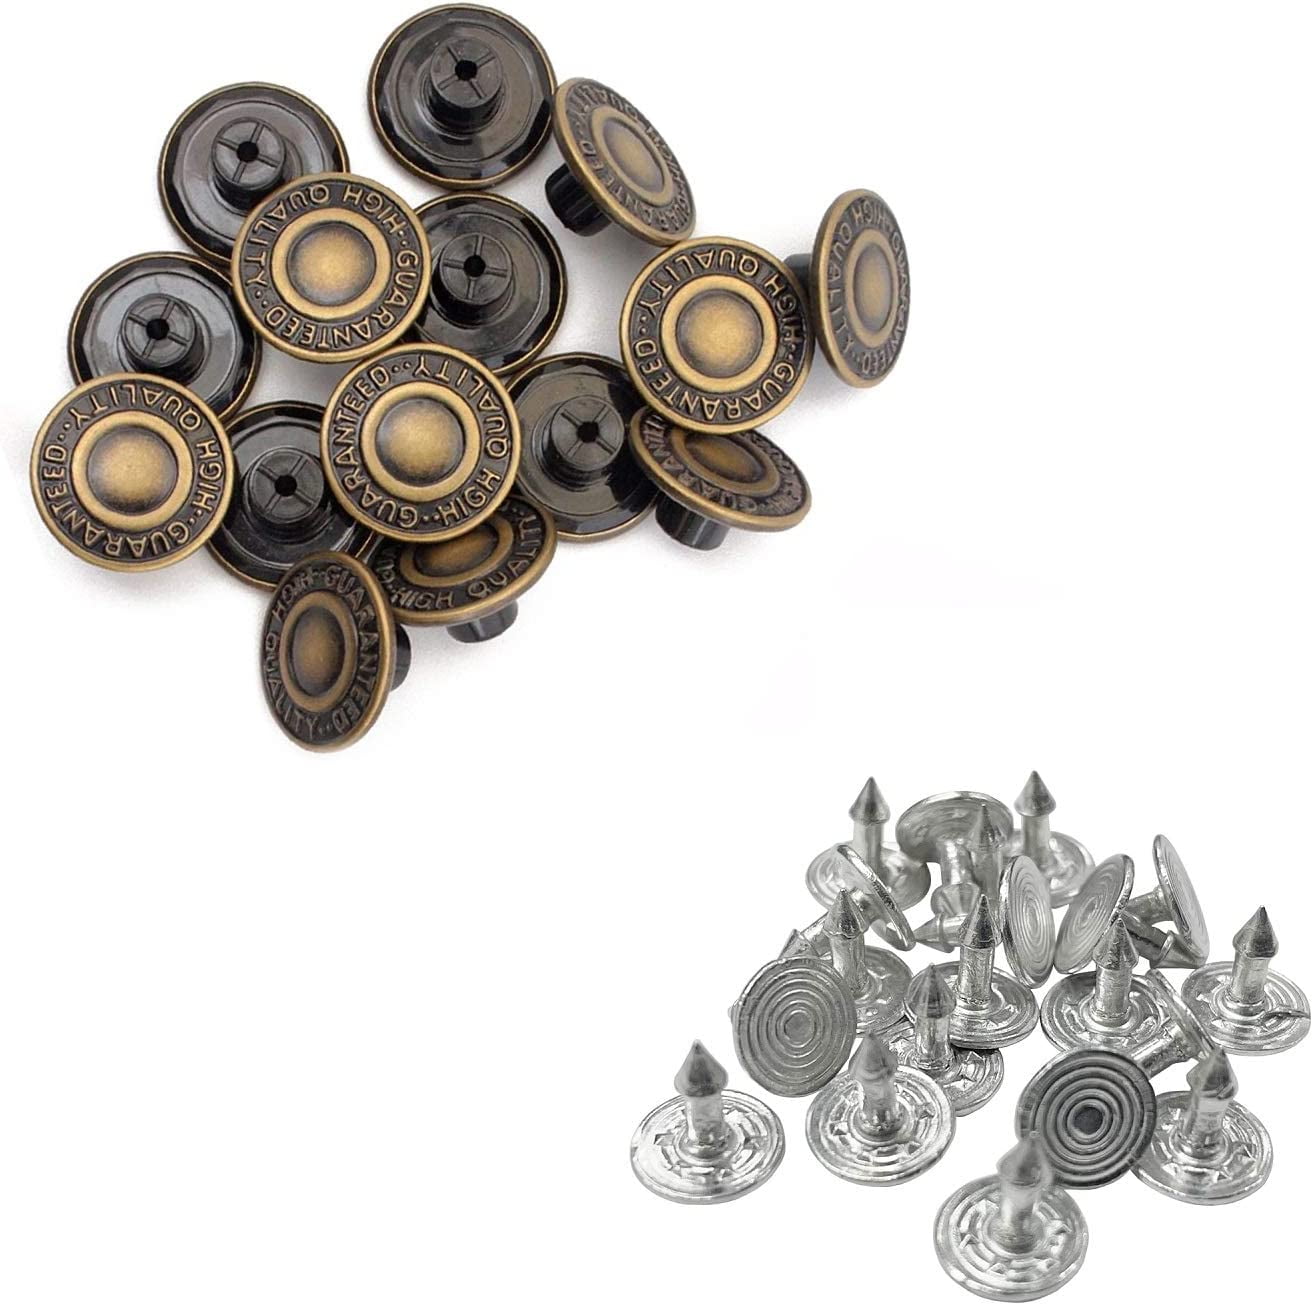 10 Metal Buttons, Wear Jeans, Replacement, 17mm, No Sew Tack Button, Bronze  Tone Metal, Jean Jacket Button, Sewing Supply, Denim Repair 